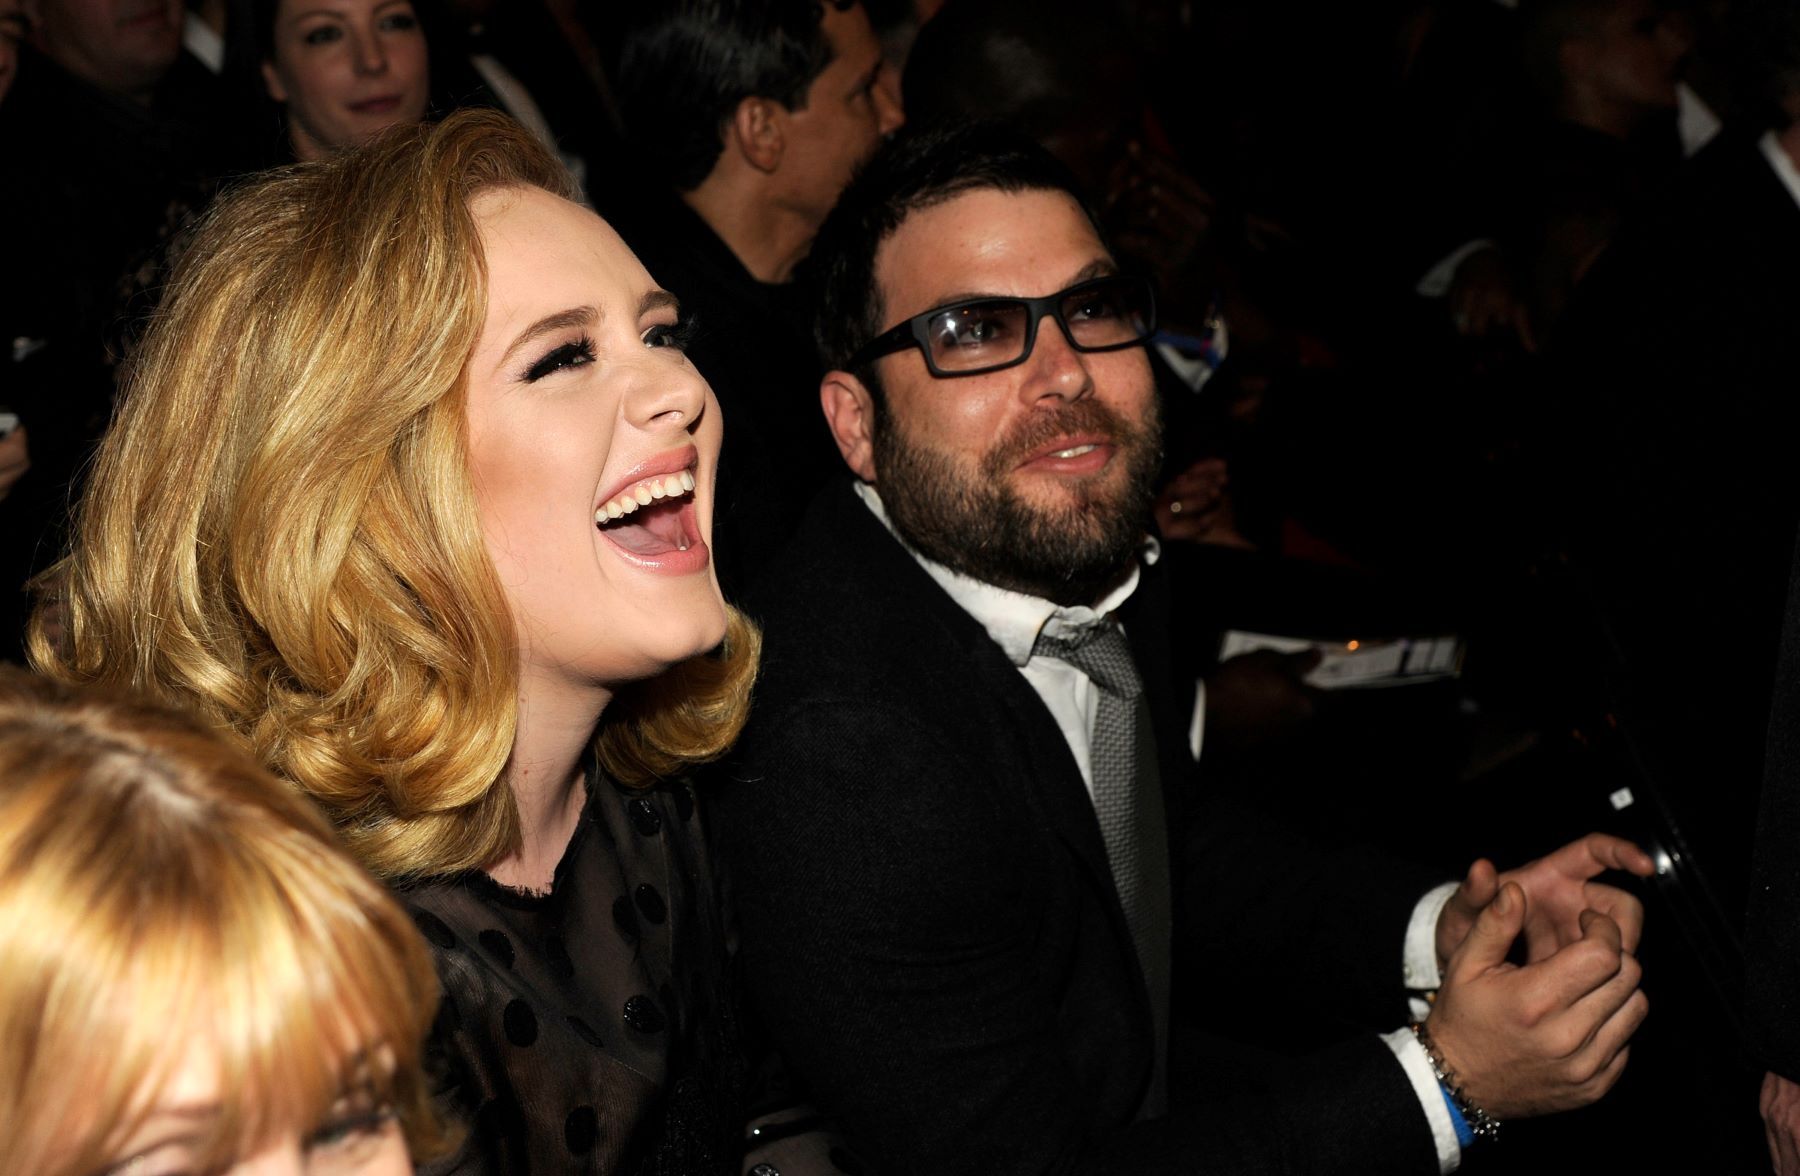 Adele and Simon Konecki attending the 54th Grammy Awards at the Staples Center in Los Angeles, California